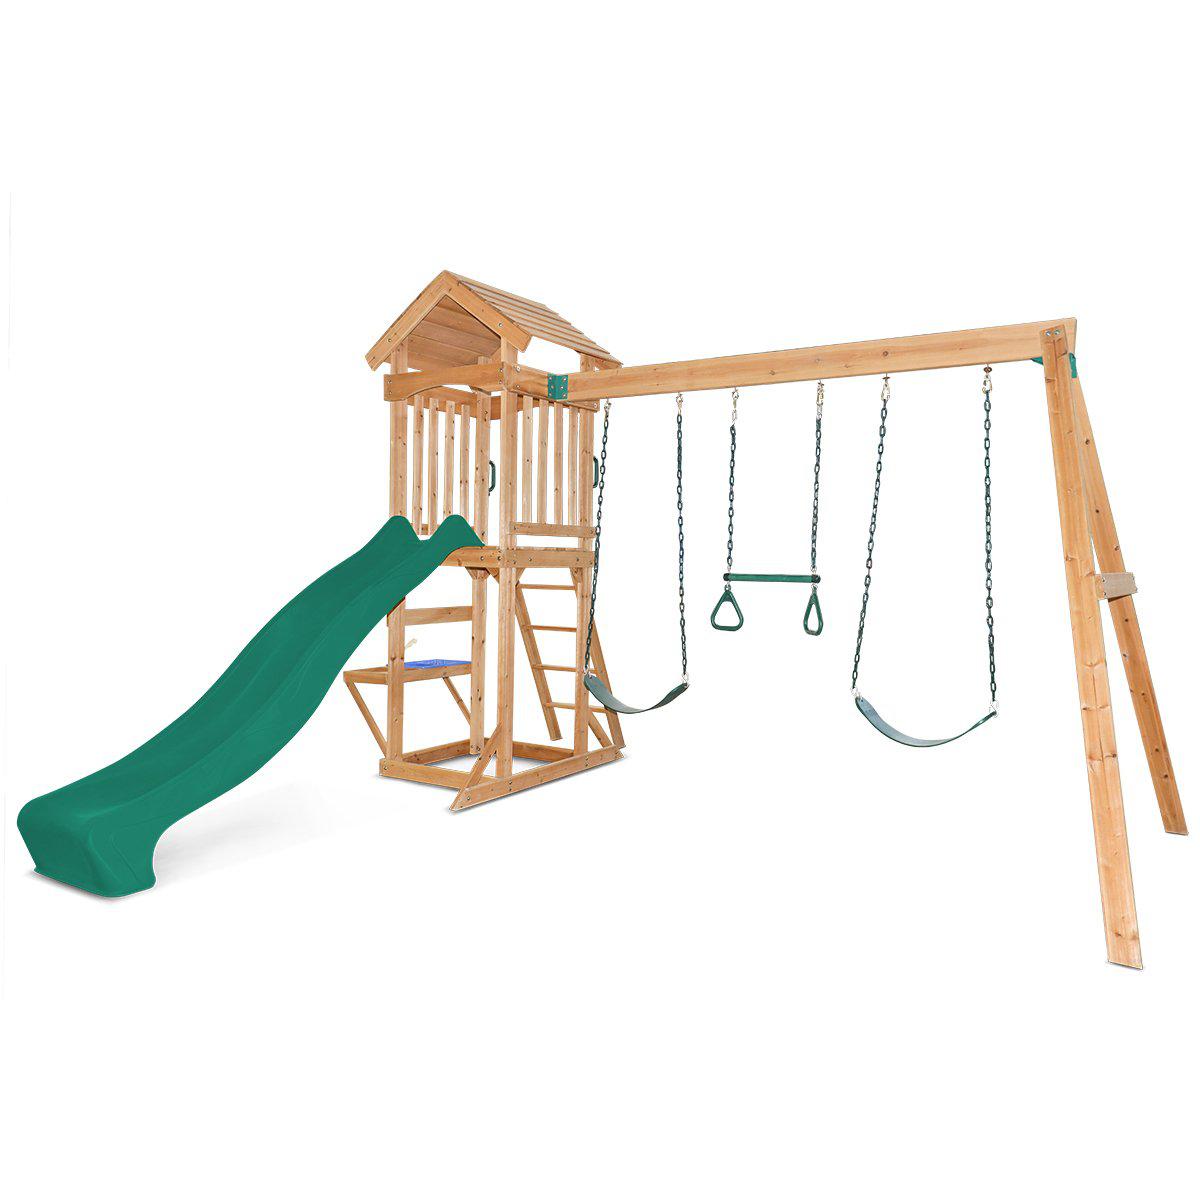 Albert Park Swing Set with Slide: Active Play and Joy for Kids